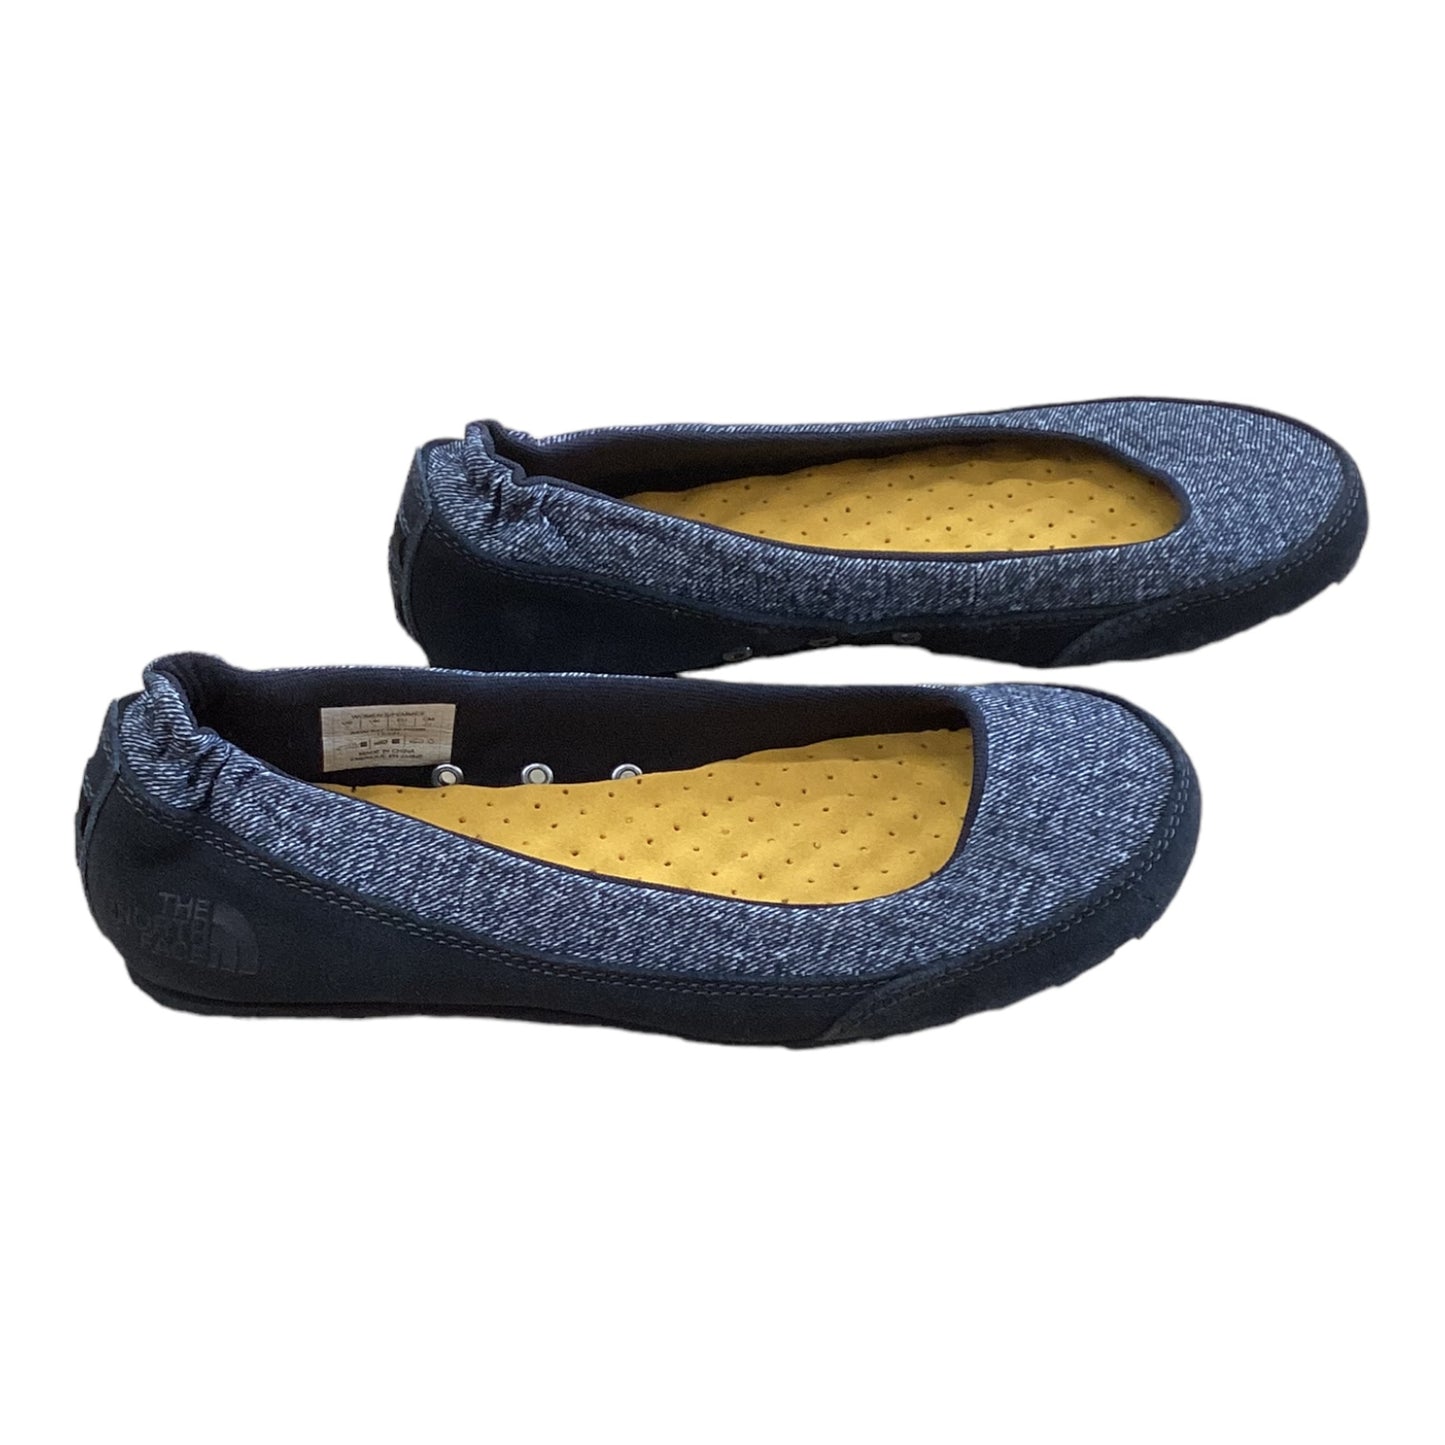 Shoes Flats By The North Face  Size: 7